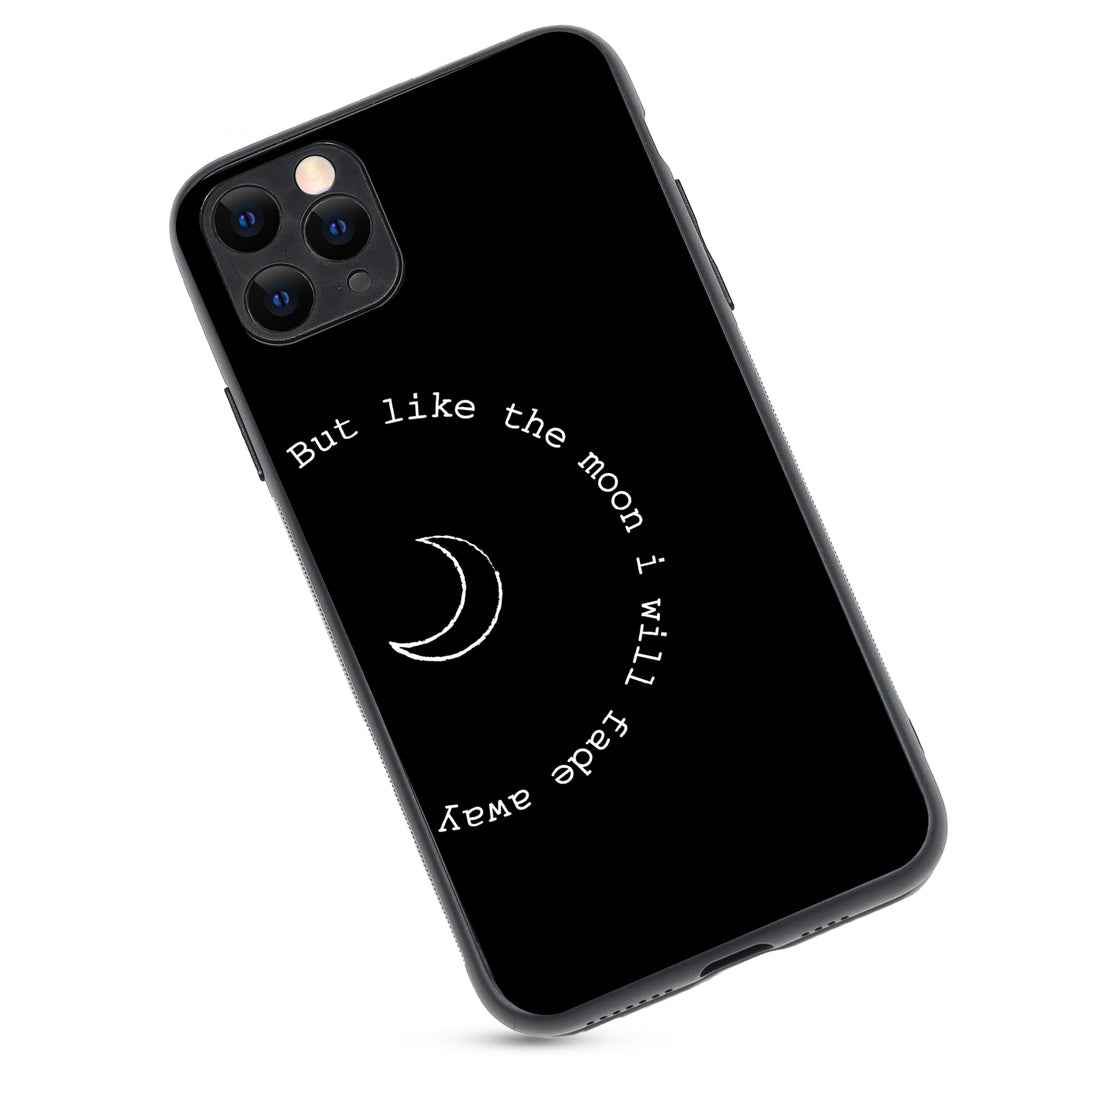 Moon Fade Away Bff iPhone 11 Pro Max Case